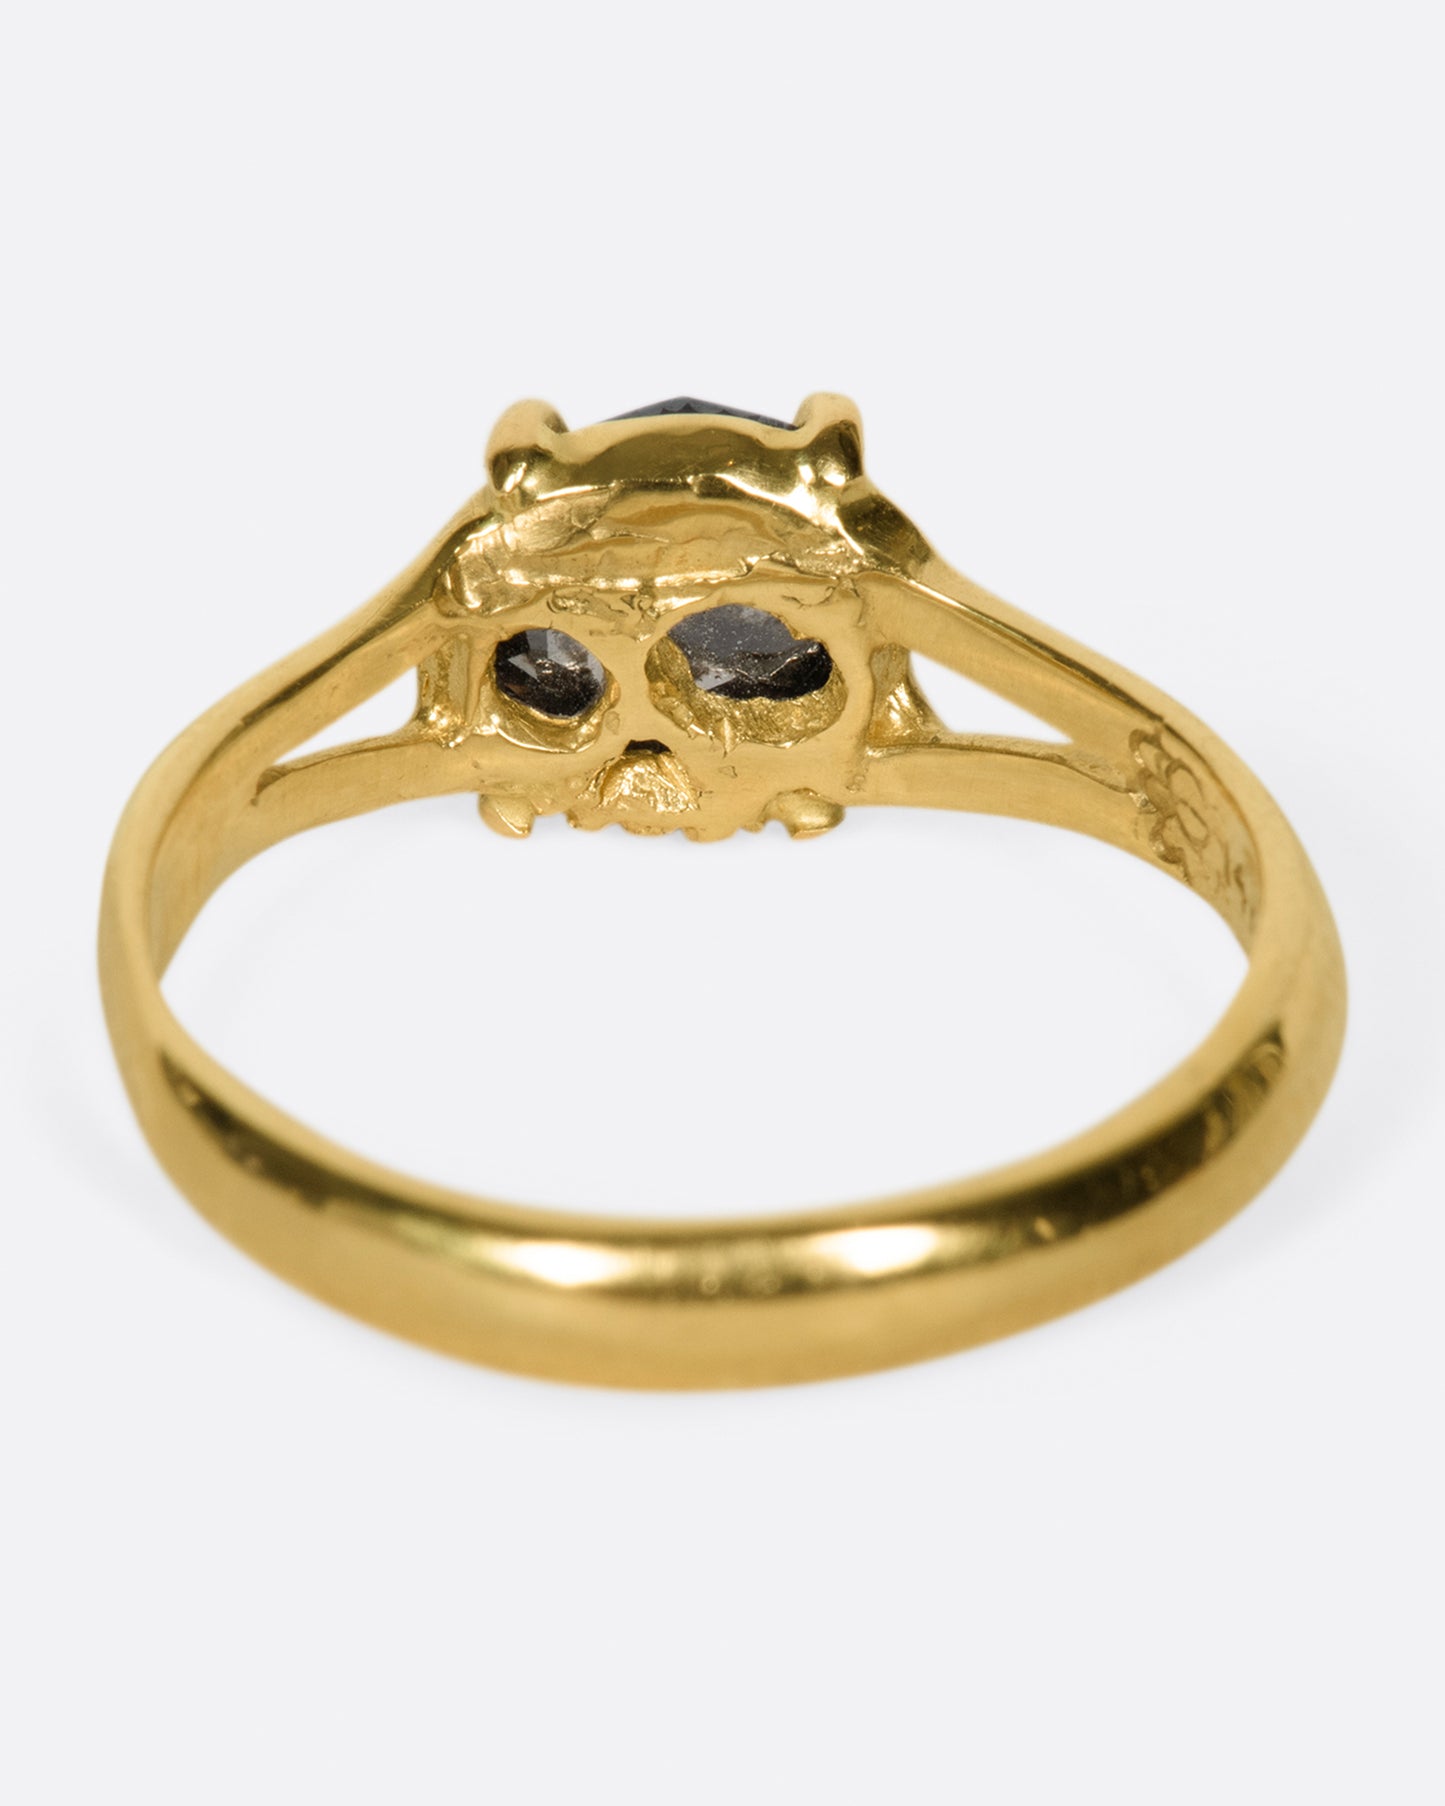 A split-shank gold ring with a prong set, rose cut, rustic diamond and "'till death" engraved on the inside.